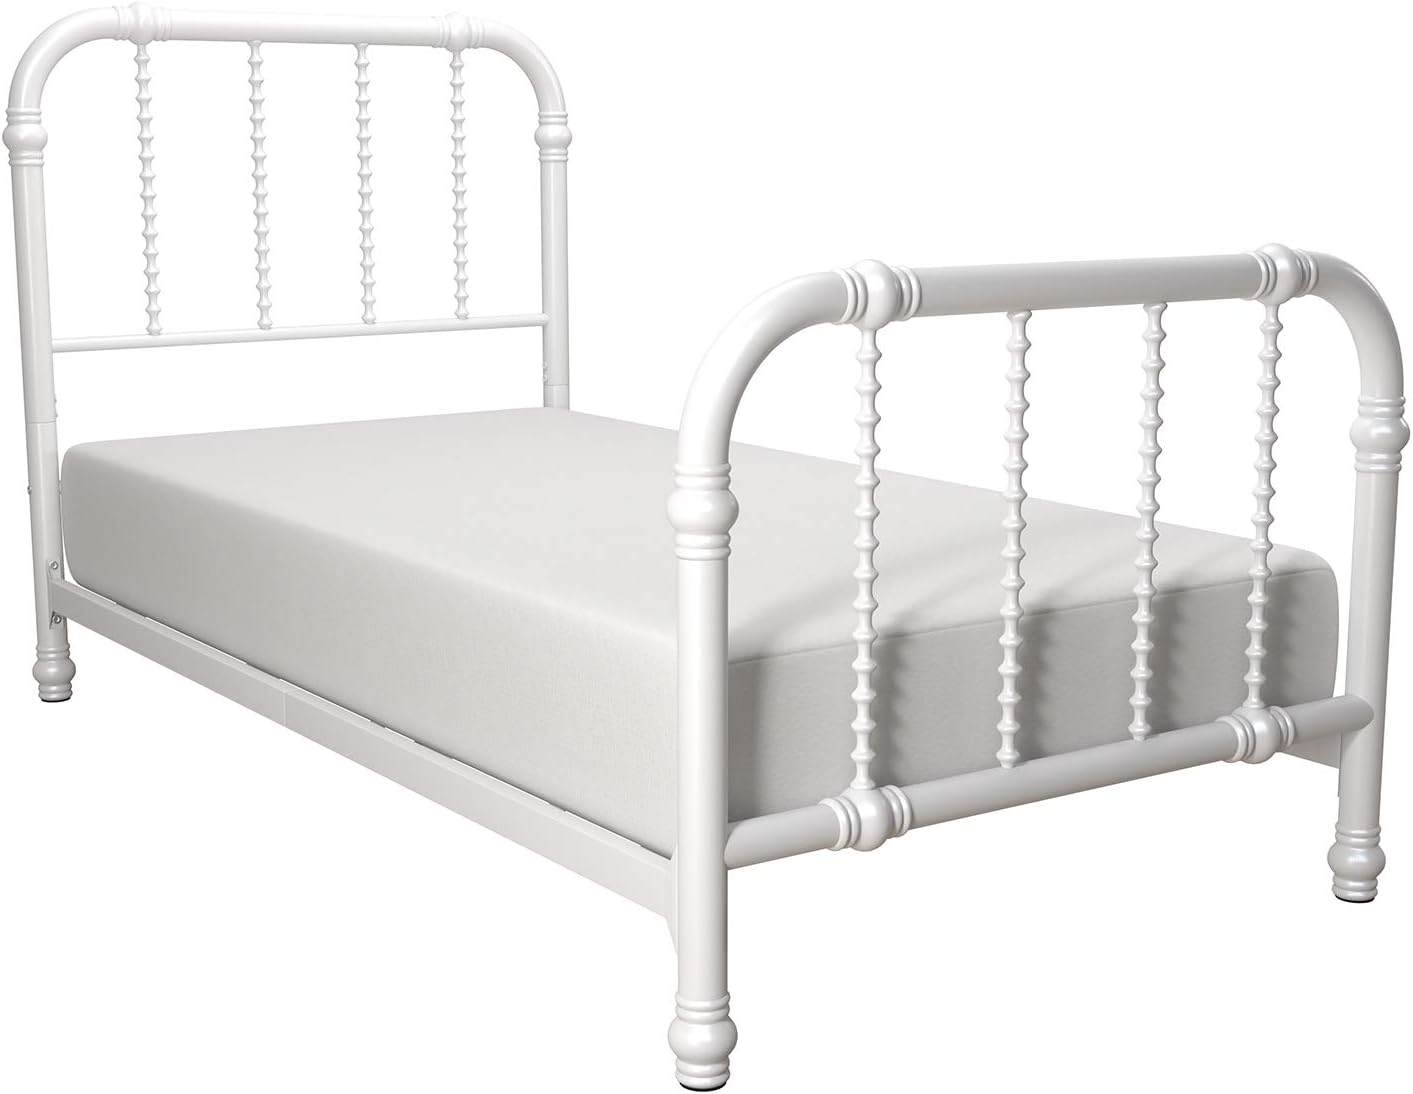 DHP Jenny Lind Kids Metal Bed Frame with Country Chic Headboard and Footboard, Underbed Storage Space for Toys, Twin, White